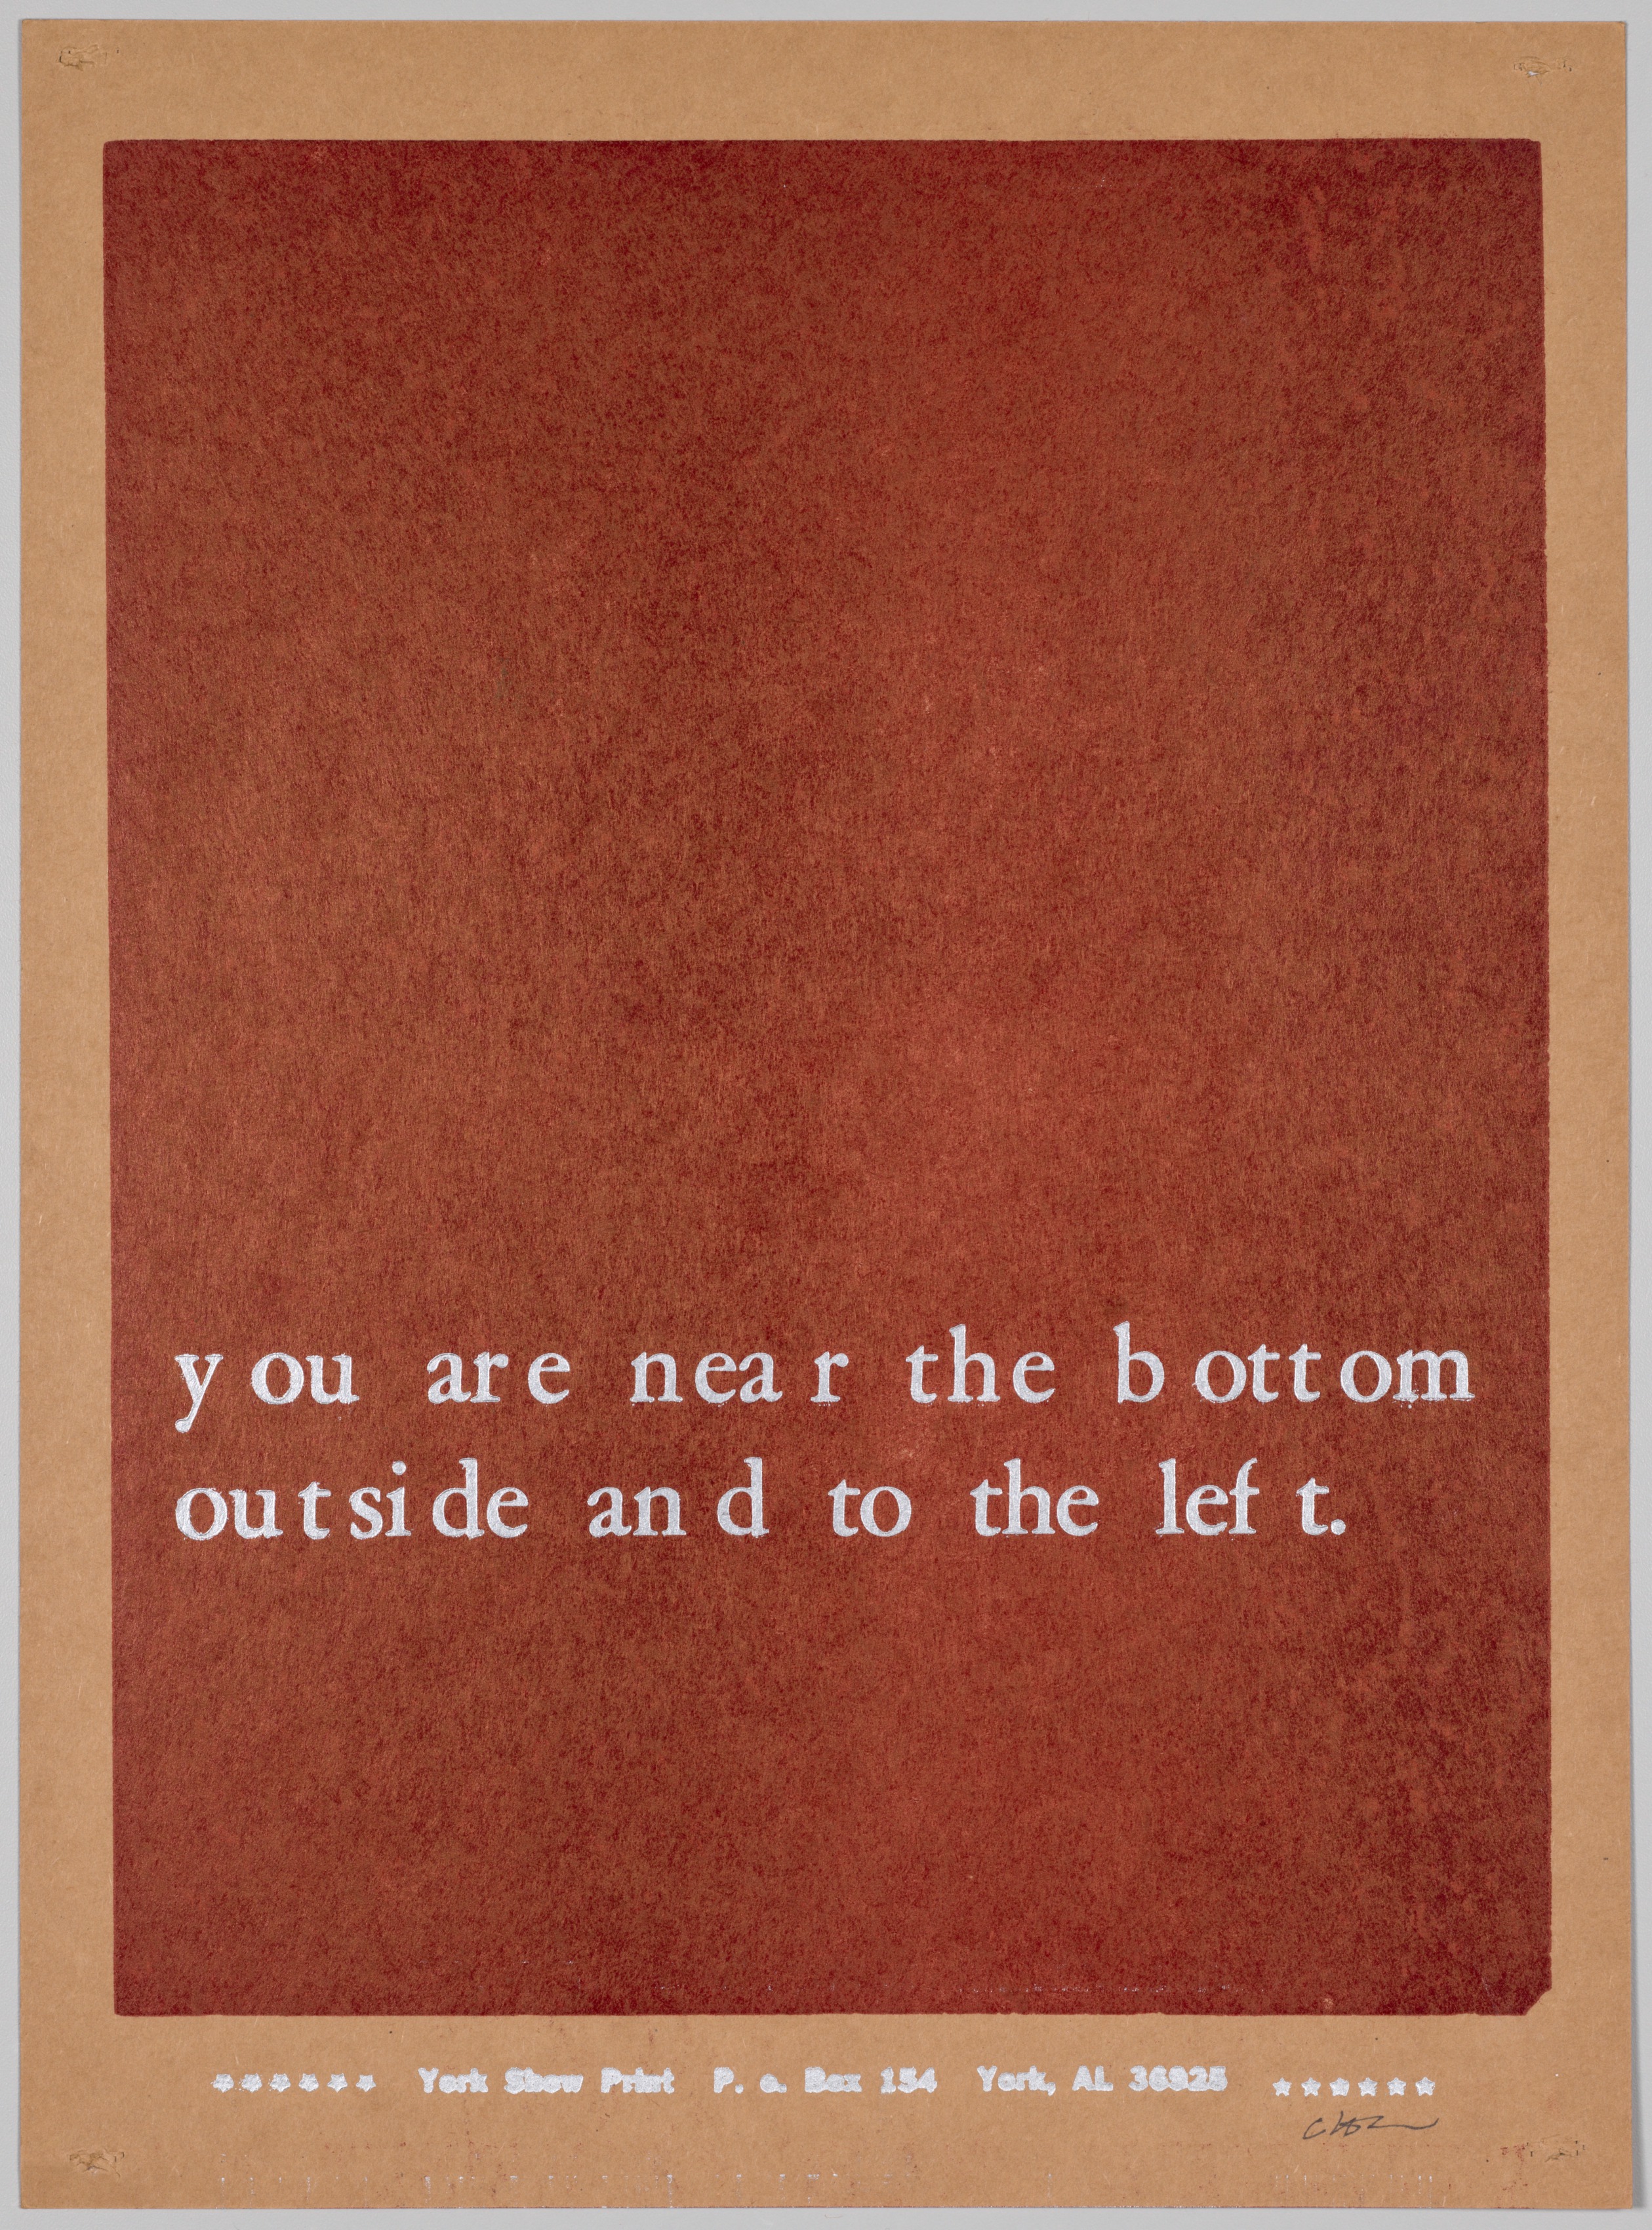 The Bad Air Smelled of Roses: You are near the bottom outside and to the left